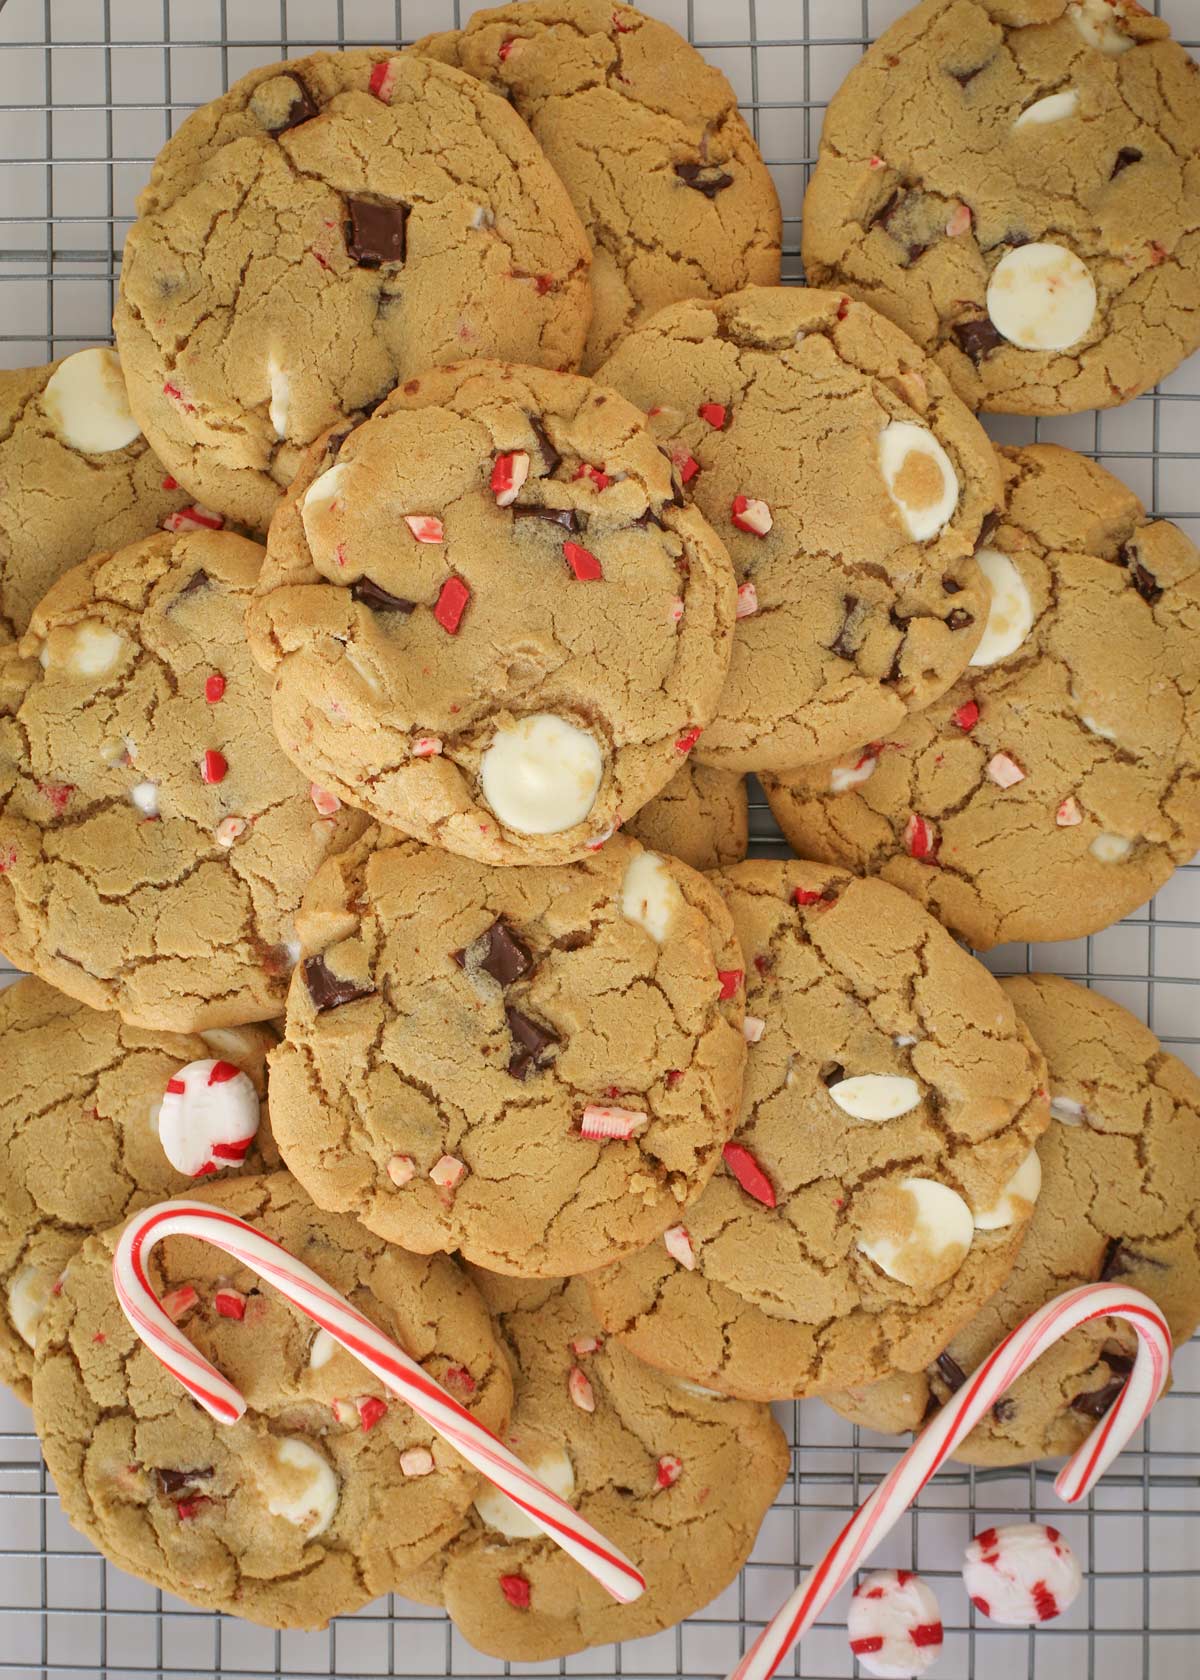 peppermint chocolate chip cookies cooling on a wire rack with a few peppermint candies added for decoration.